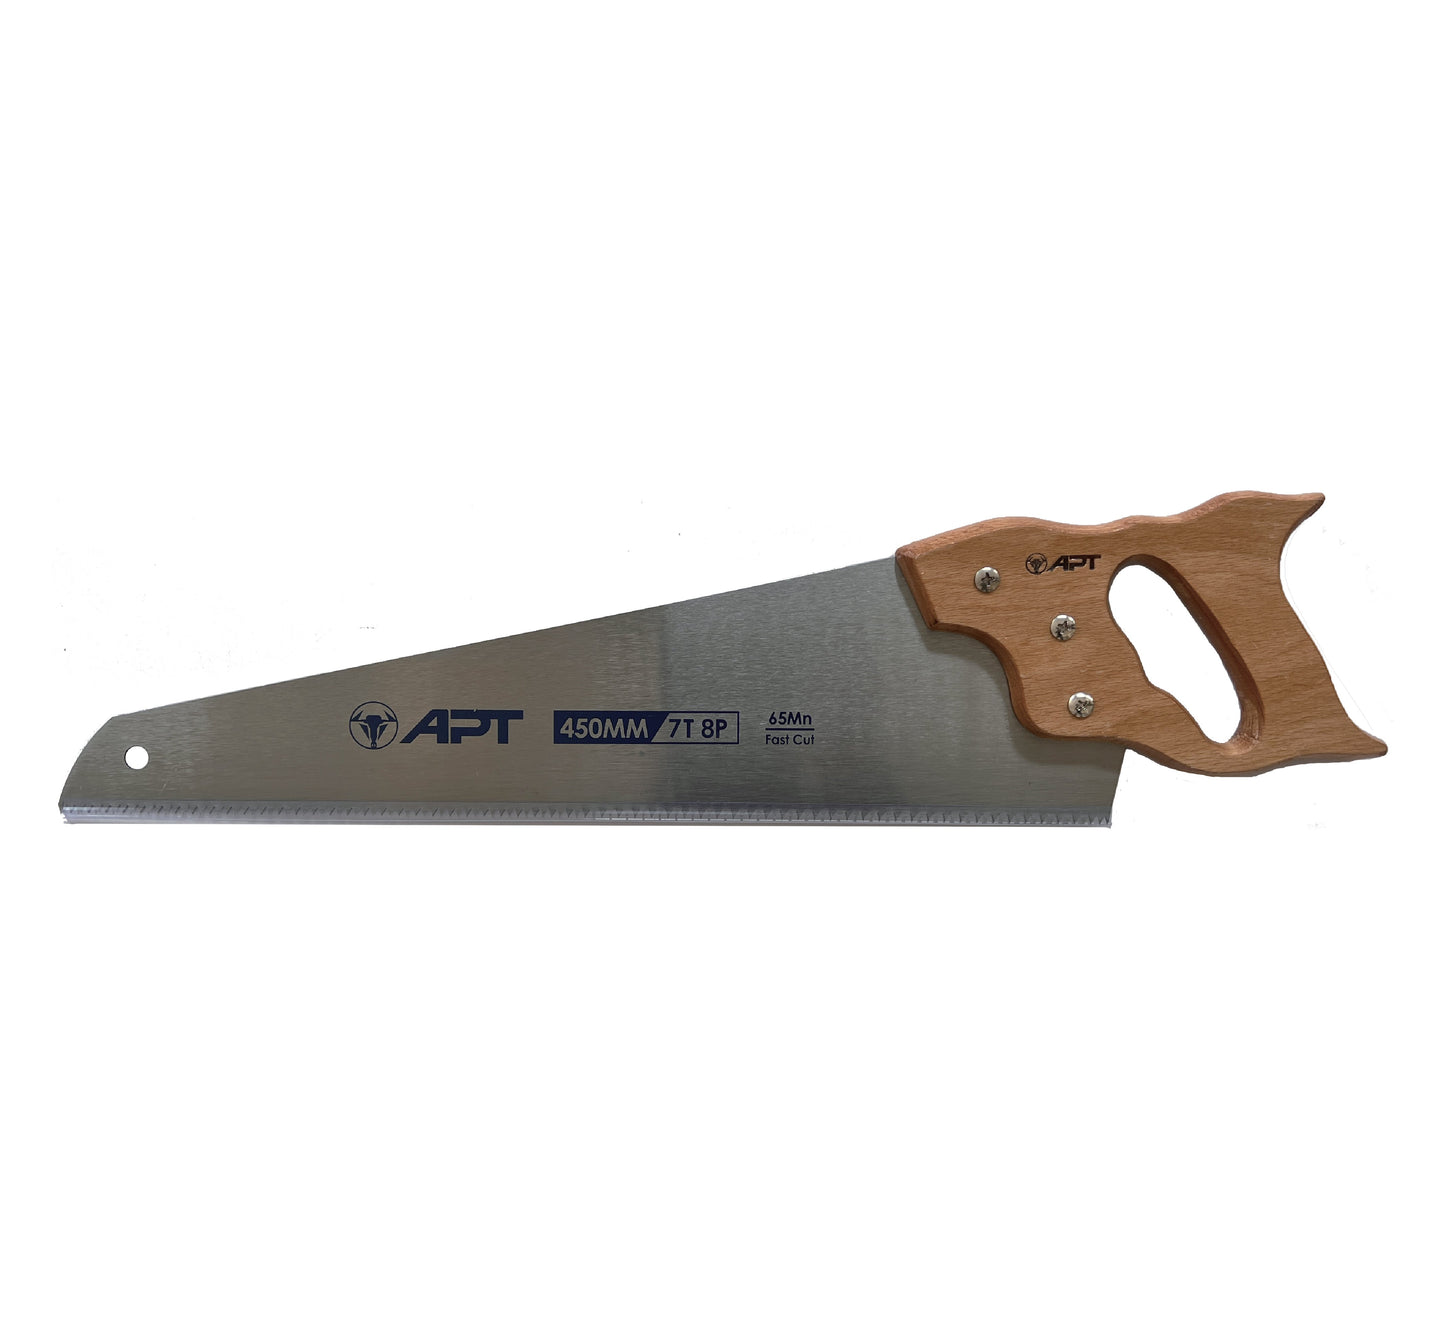 APT HAND SAW FOR WOOD WOODEN HANDLE 450MM-AH0101130-18-5122